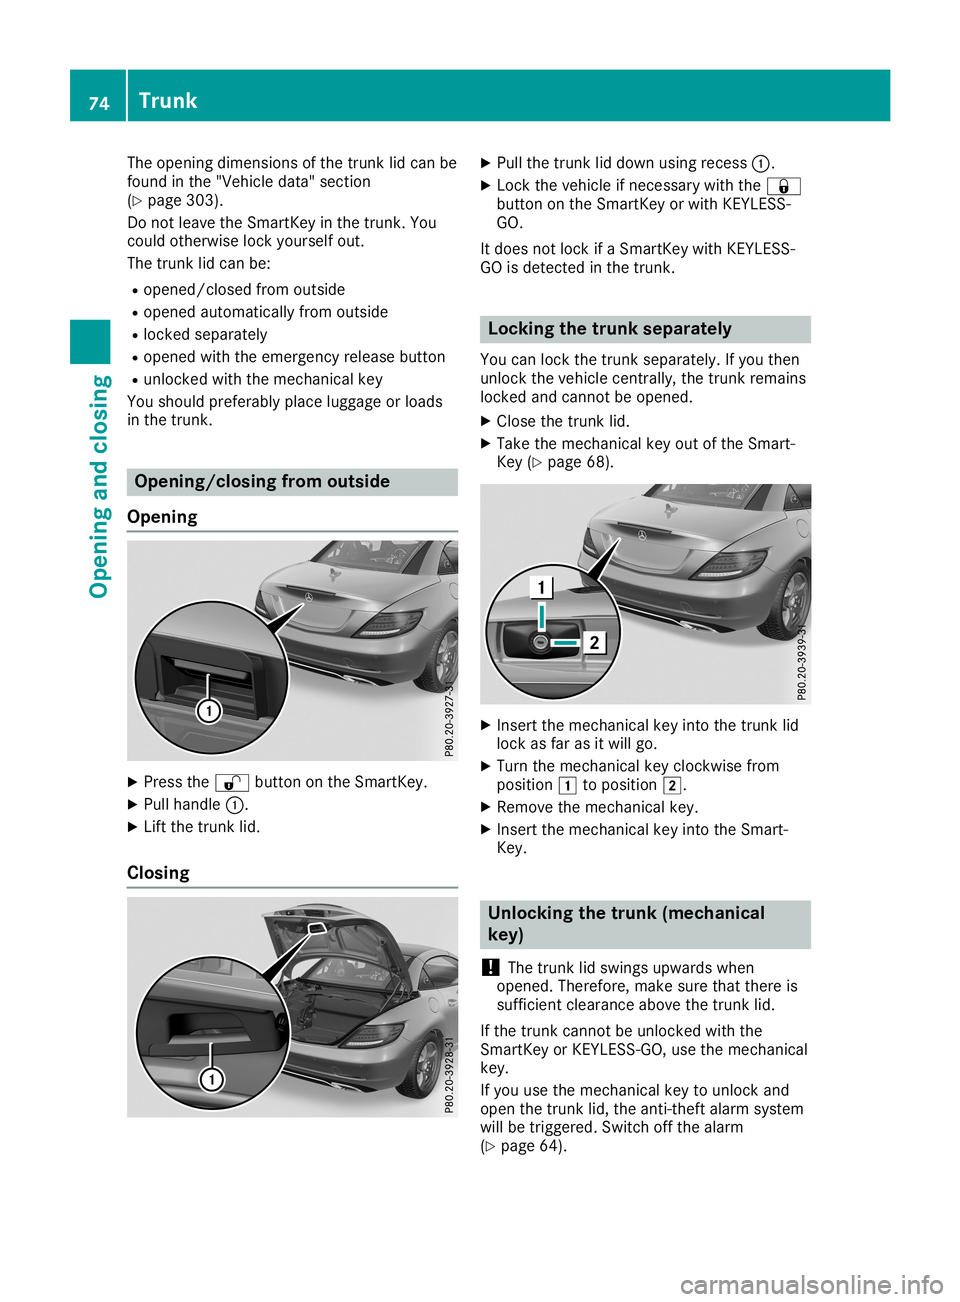 MERCEDES-BENZ SLC ROADSTER 2019  Owners Manual The
opening dimensions ofthe trunk lidcan be
found inthe "Vehicle data"section
(Y page 303).
Do not leave theSmart Keyinthe trunk .You
could otherwise lockyourself out.
The trunk lidcan be:
R 